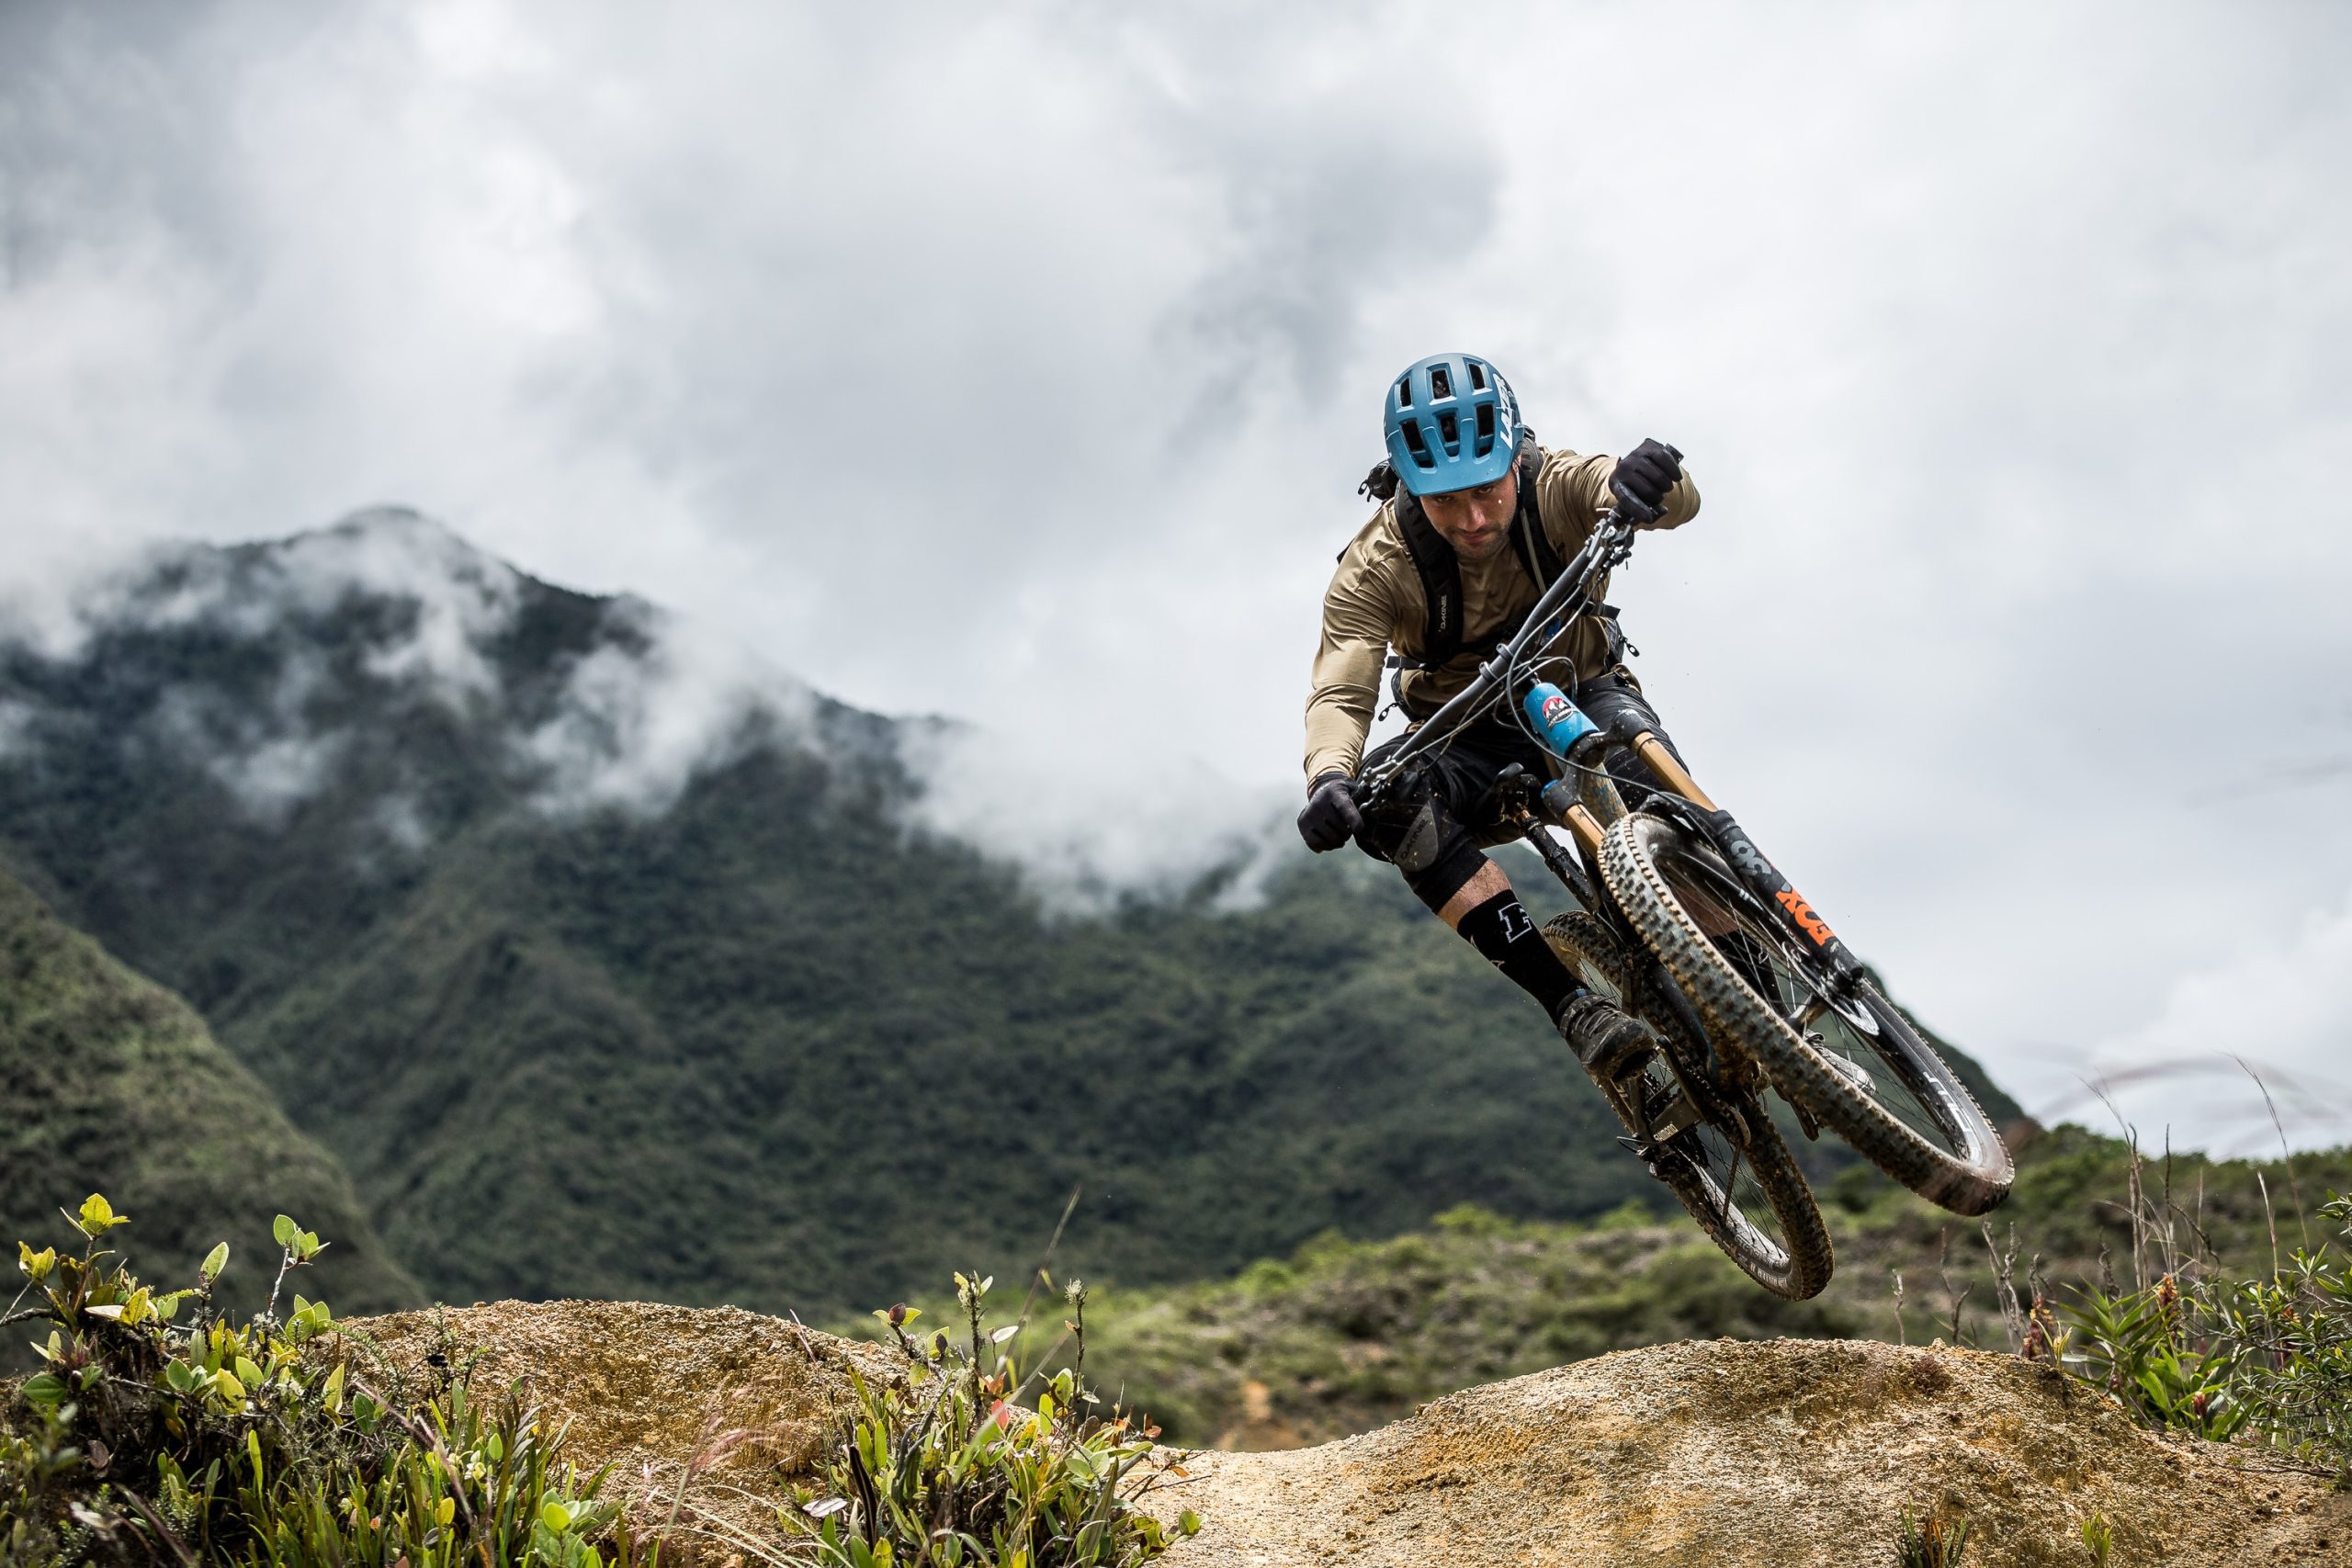 Scrubbing the natural jumps of Ibarra on our Ecuador MTB Film